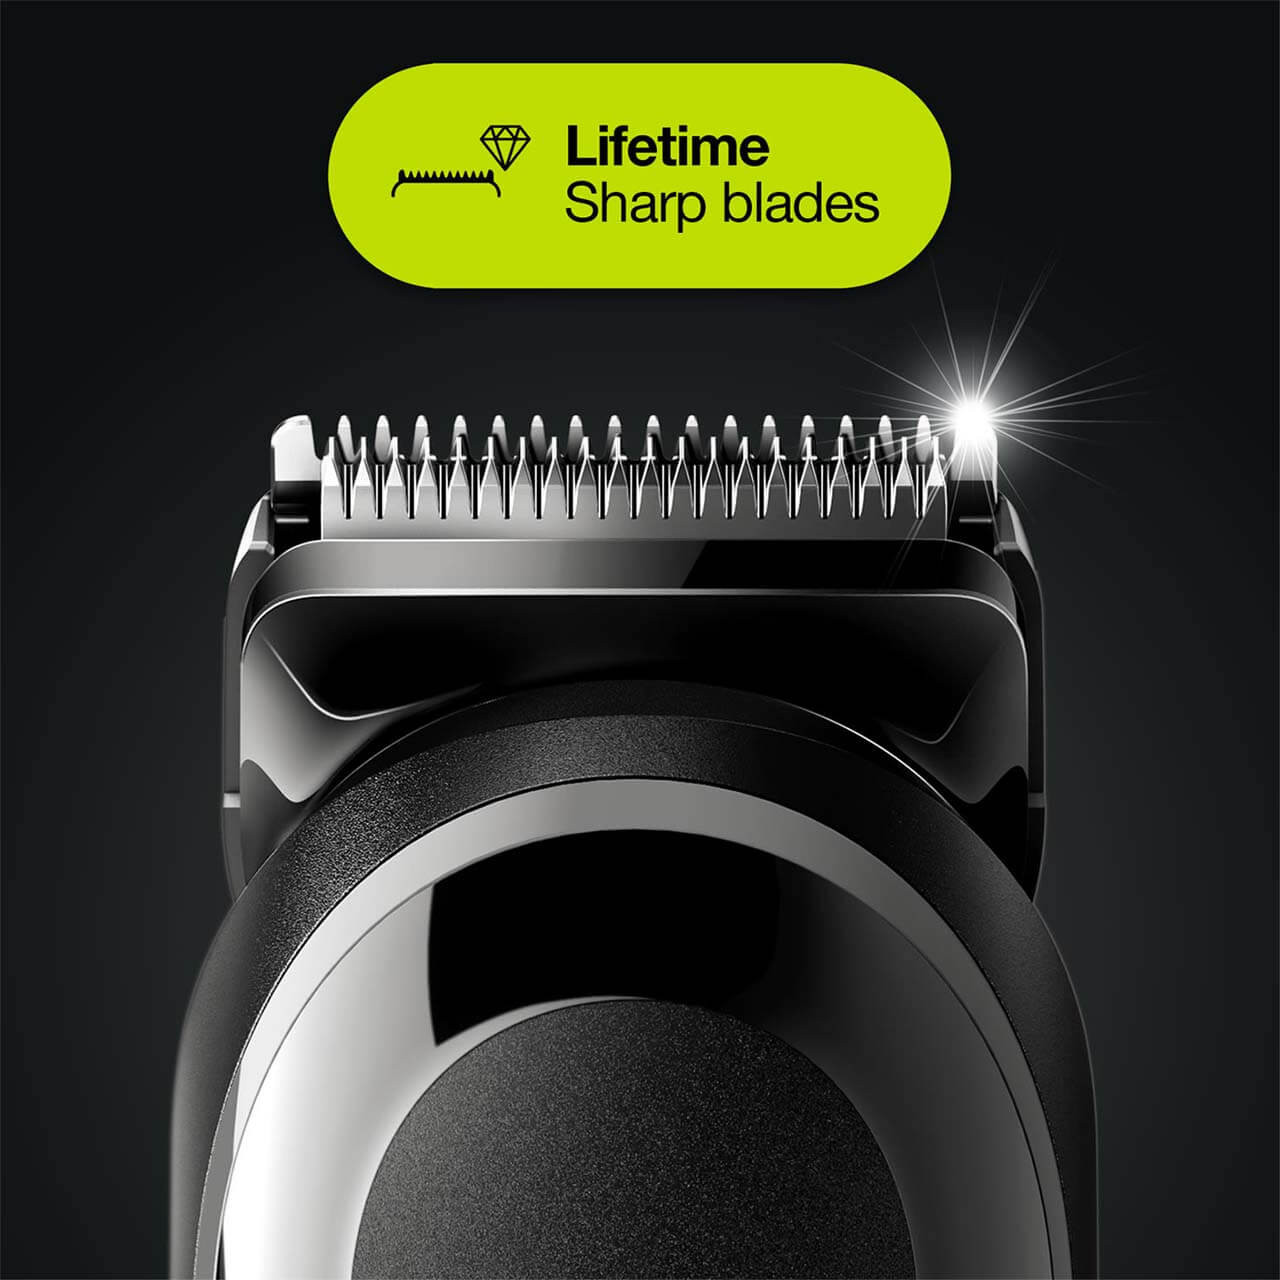 trimmer styling Body, for Face, Hair, All-in-One 3 and 6-in-1 Black kit,